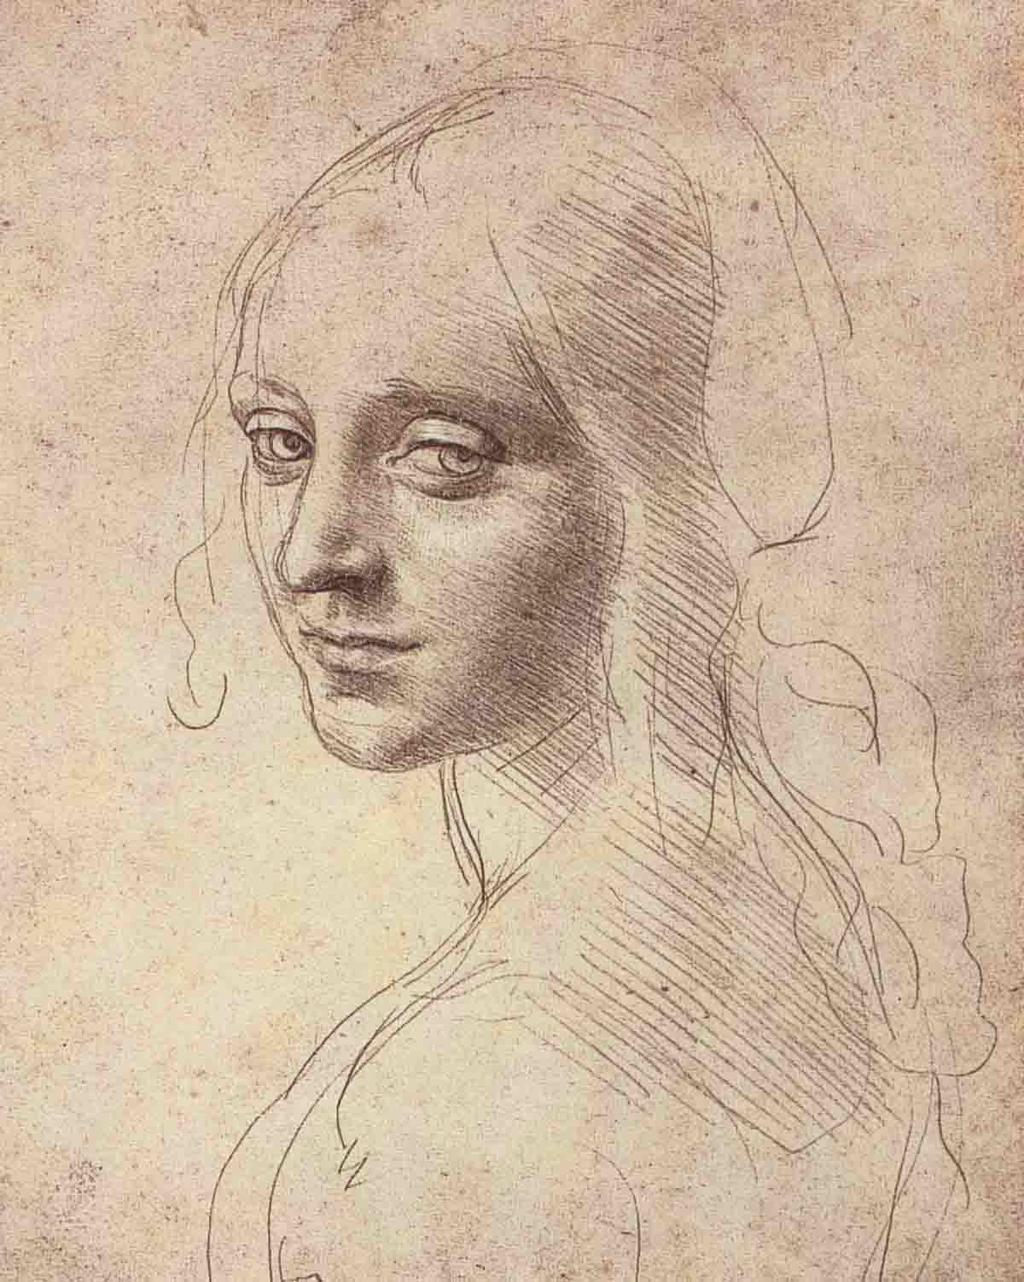 Leonardo often did preliminary sketches before he finalized the outlines and shading of his drawings. Under close scrutiny, the thin faint lines are still visible on many of his drawings (Figure 901).